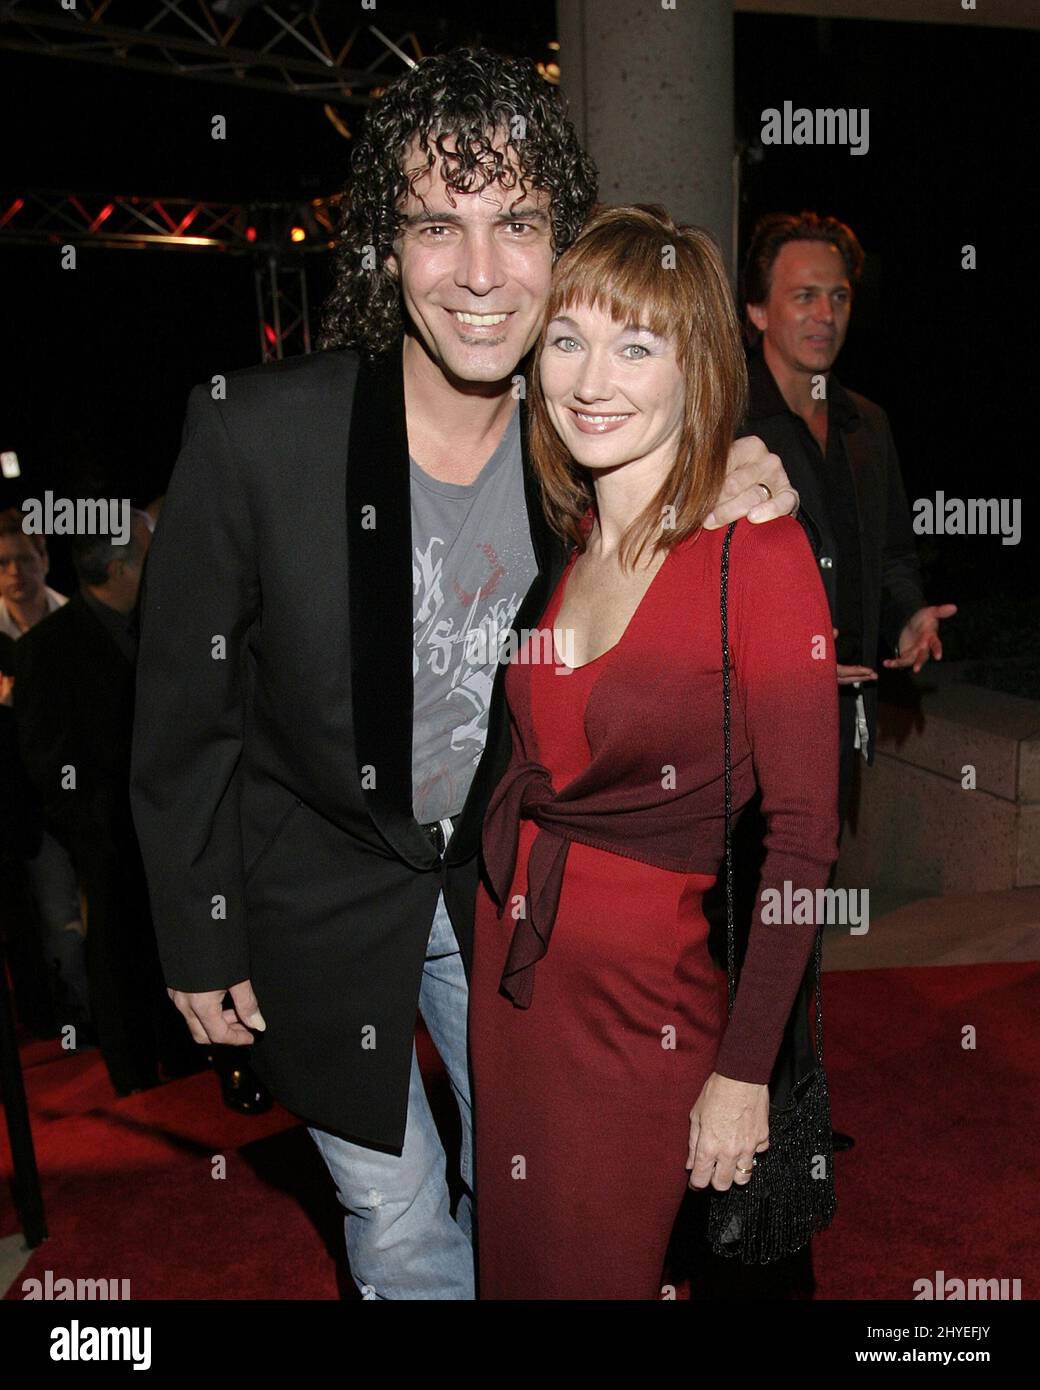 Country singer songwriter Lari White passed away today from cancer. Lari White and Chuck Cannon at the 53rd Annual BMI Country Awards held at the BMI Building on October 18, 2005 in Nashville, TN. Stock Photo